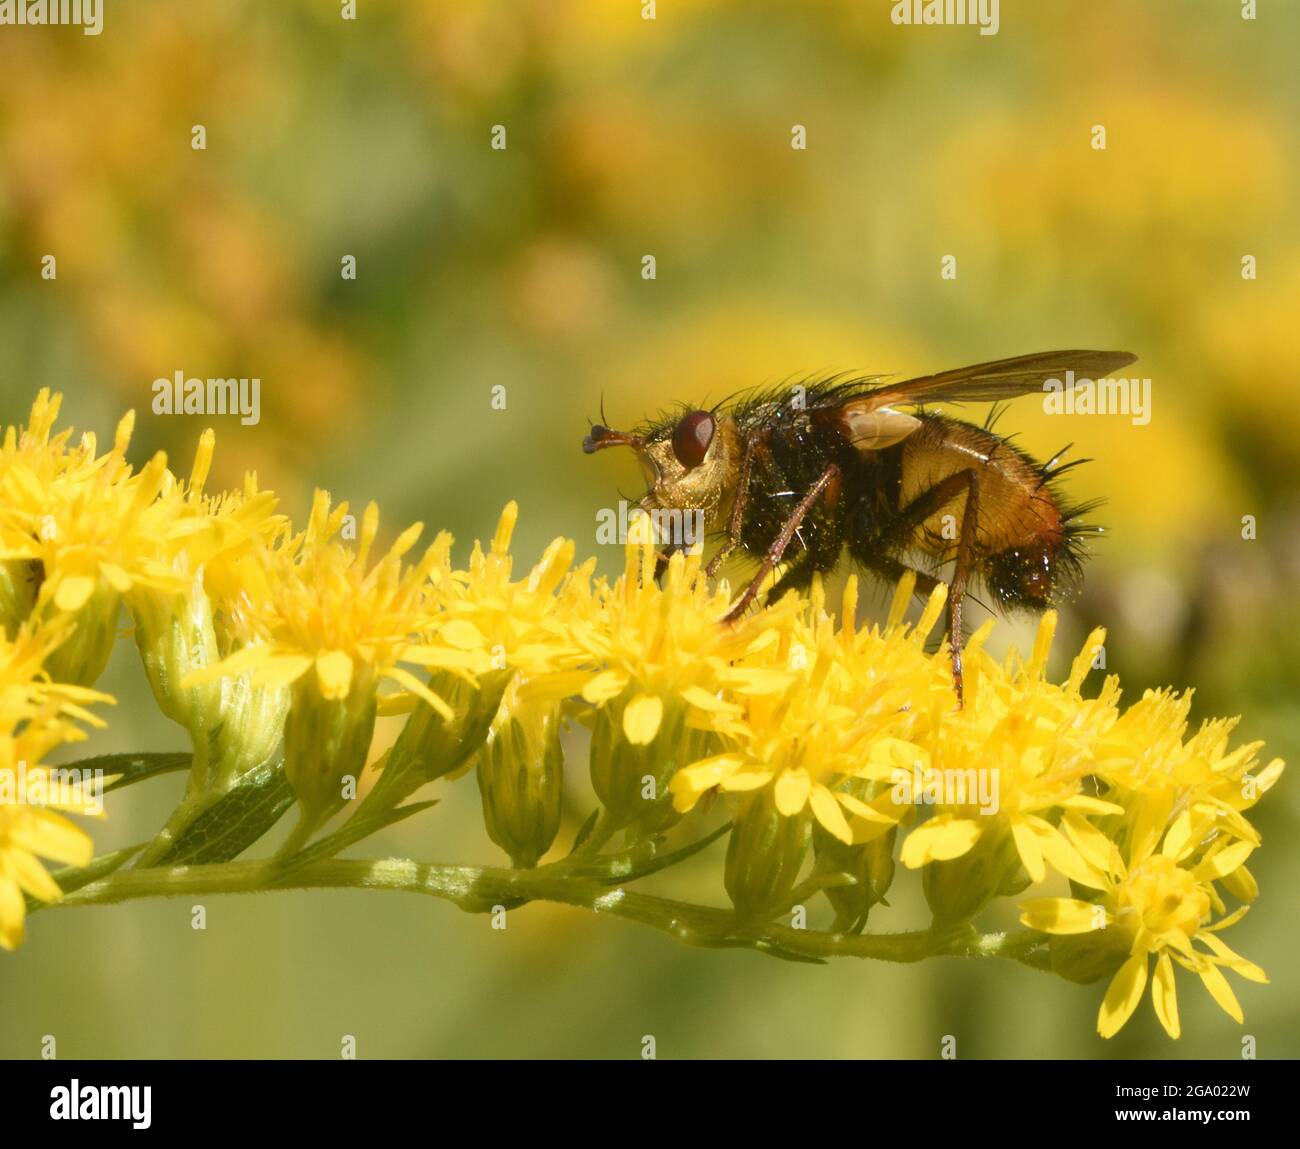 A fly feeds on a golden rod or solidago flower head. Bedgebury Forest, Kent, UK. Stock Photo